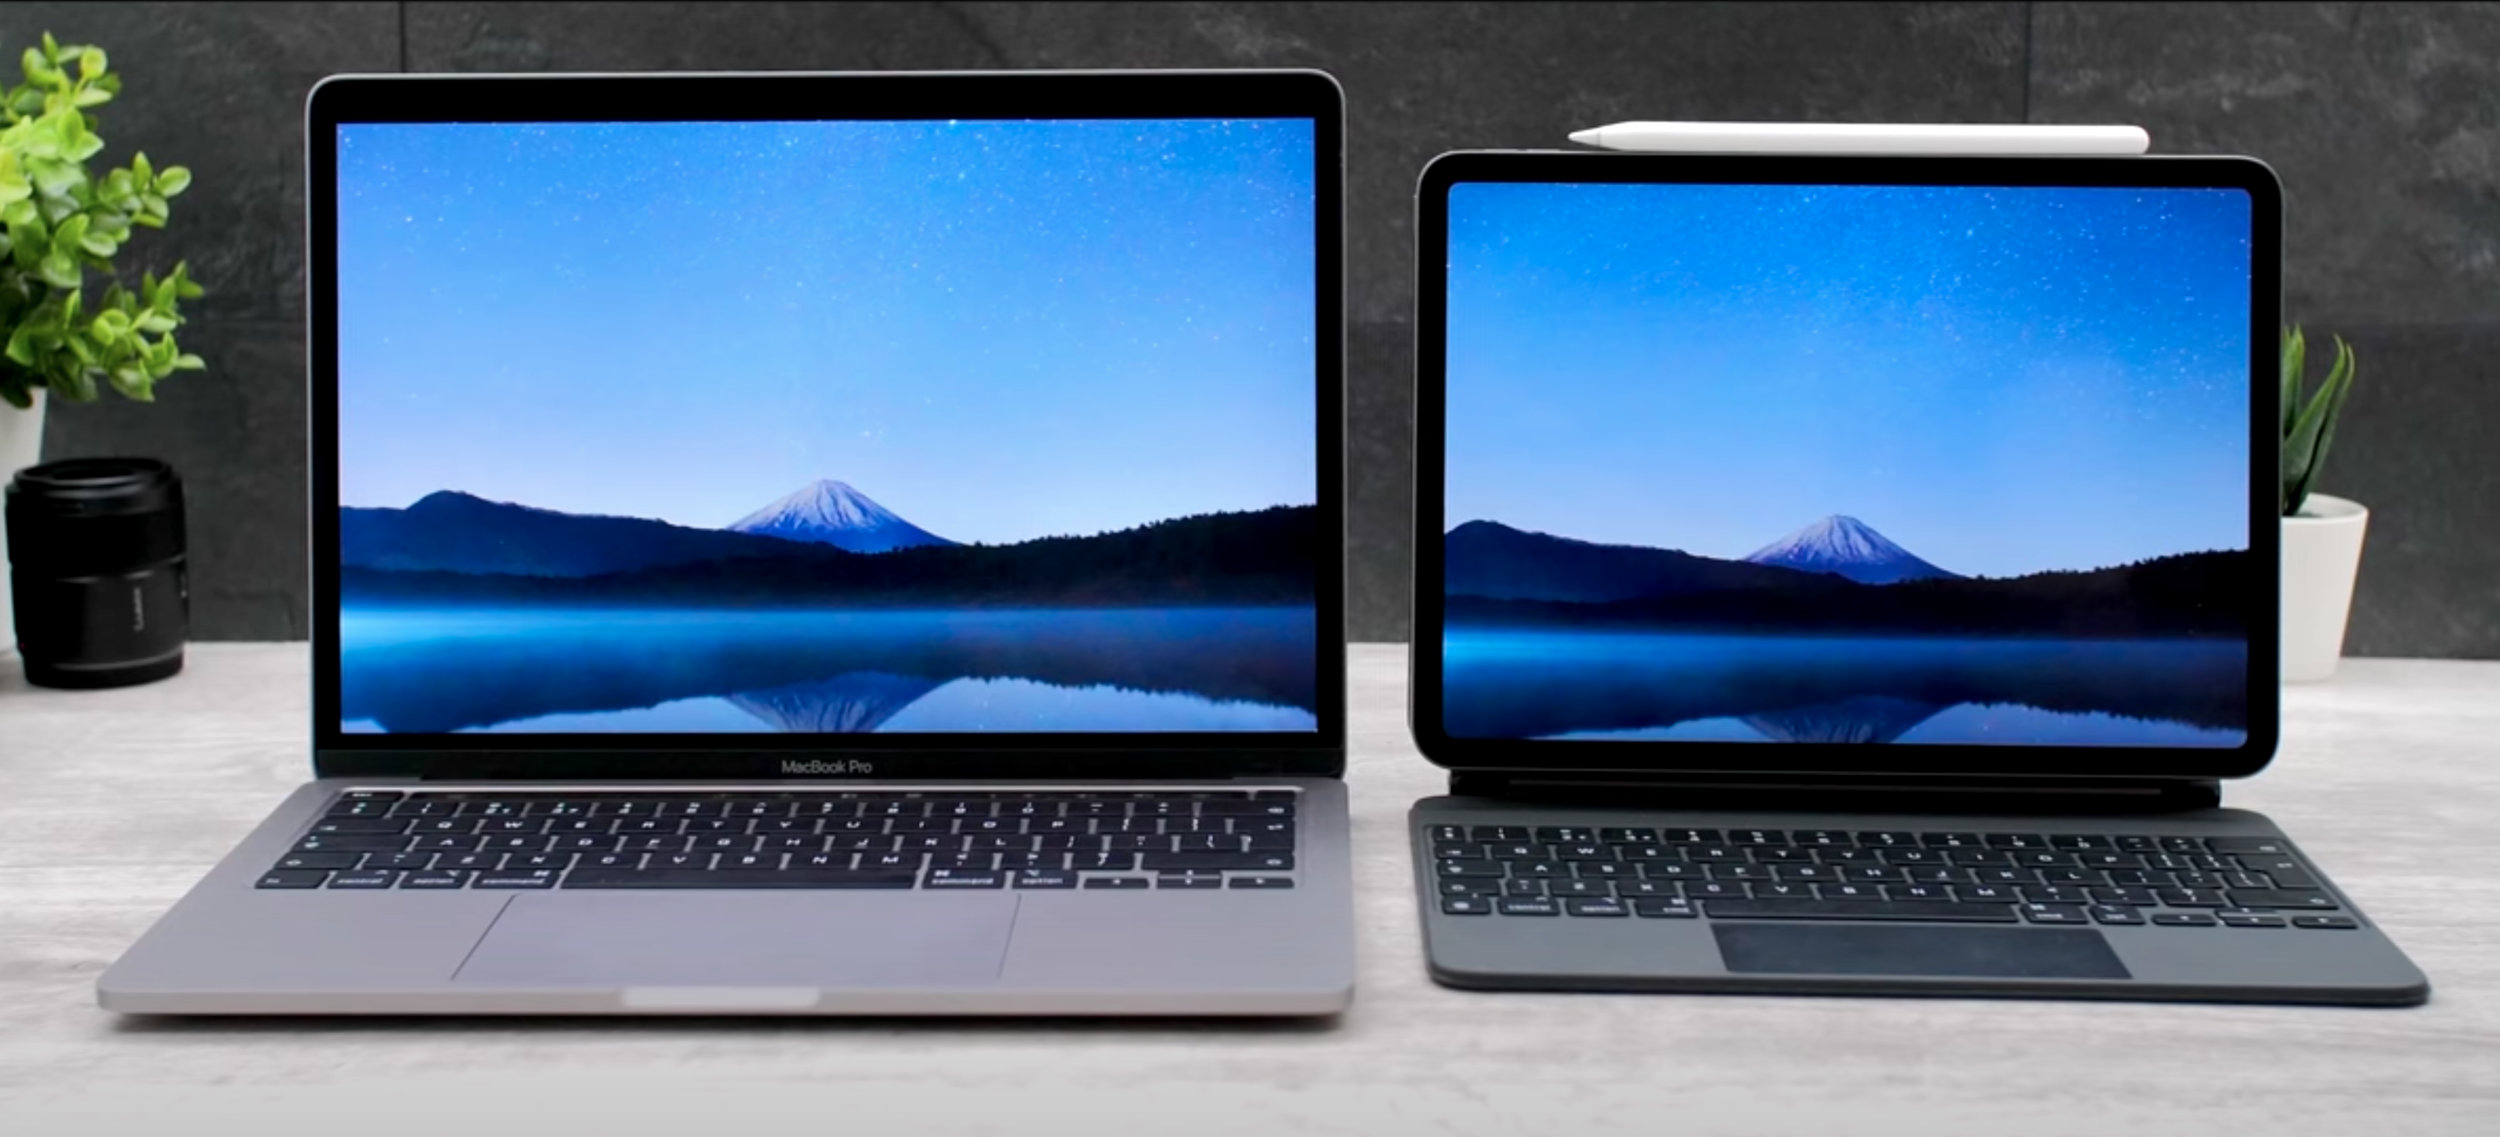 iPad Pro vs MacBook Pro 13 (2020) Which One's the Real Laptop